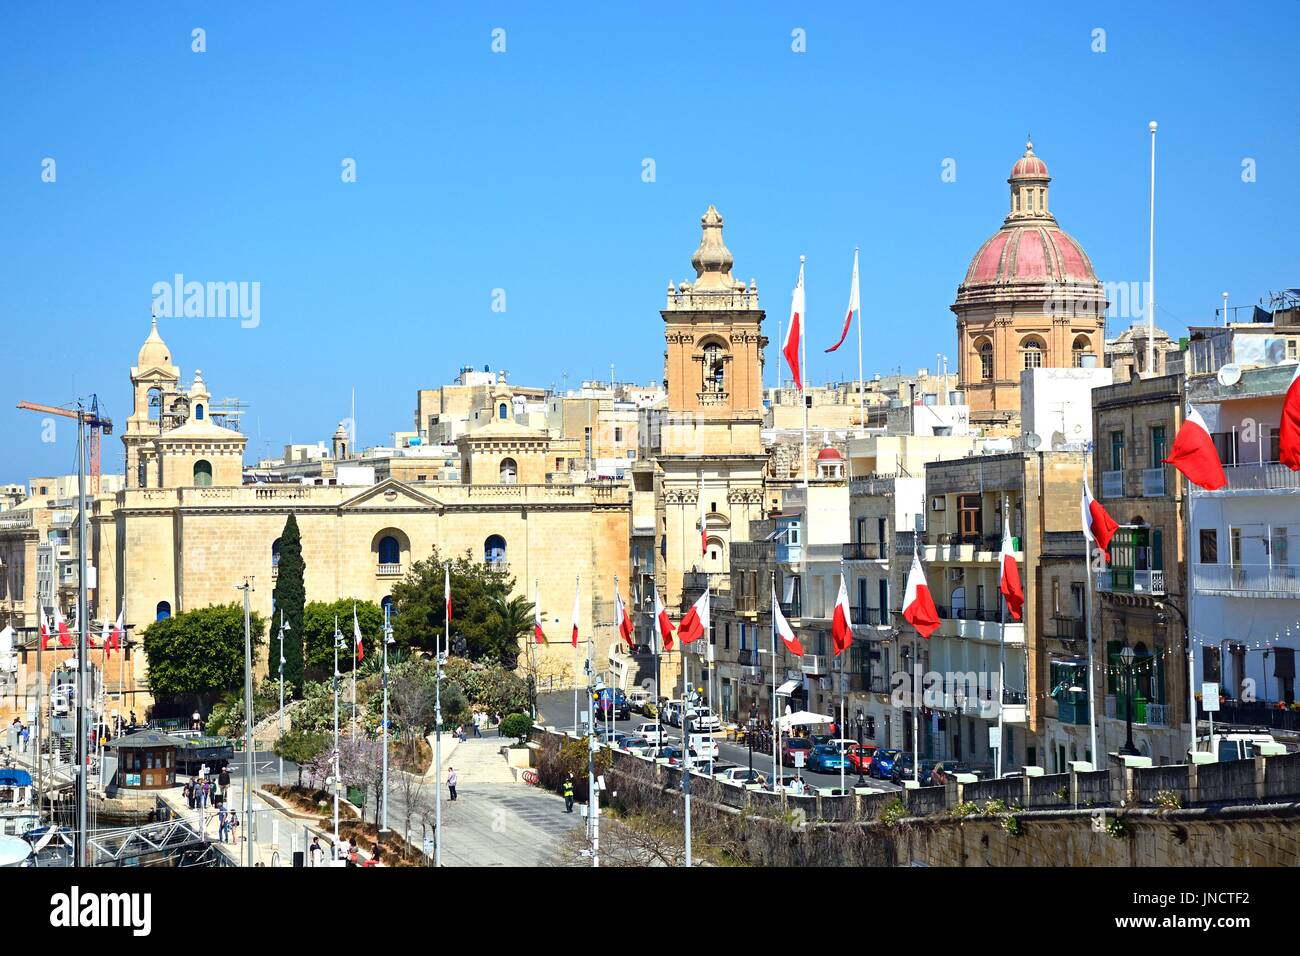 Elevated view along the waterfront buildings towards St Lawrence church, Vittoriosa (Birgu), Malta, Europe. Stock Photo